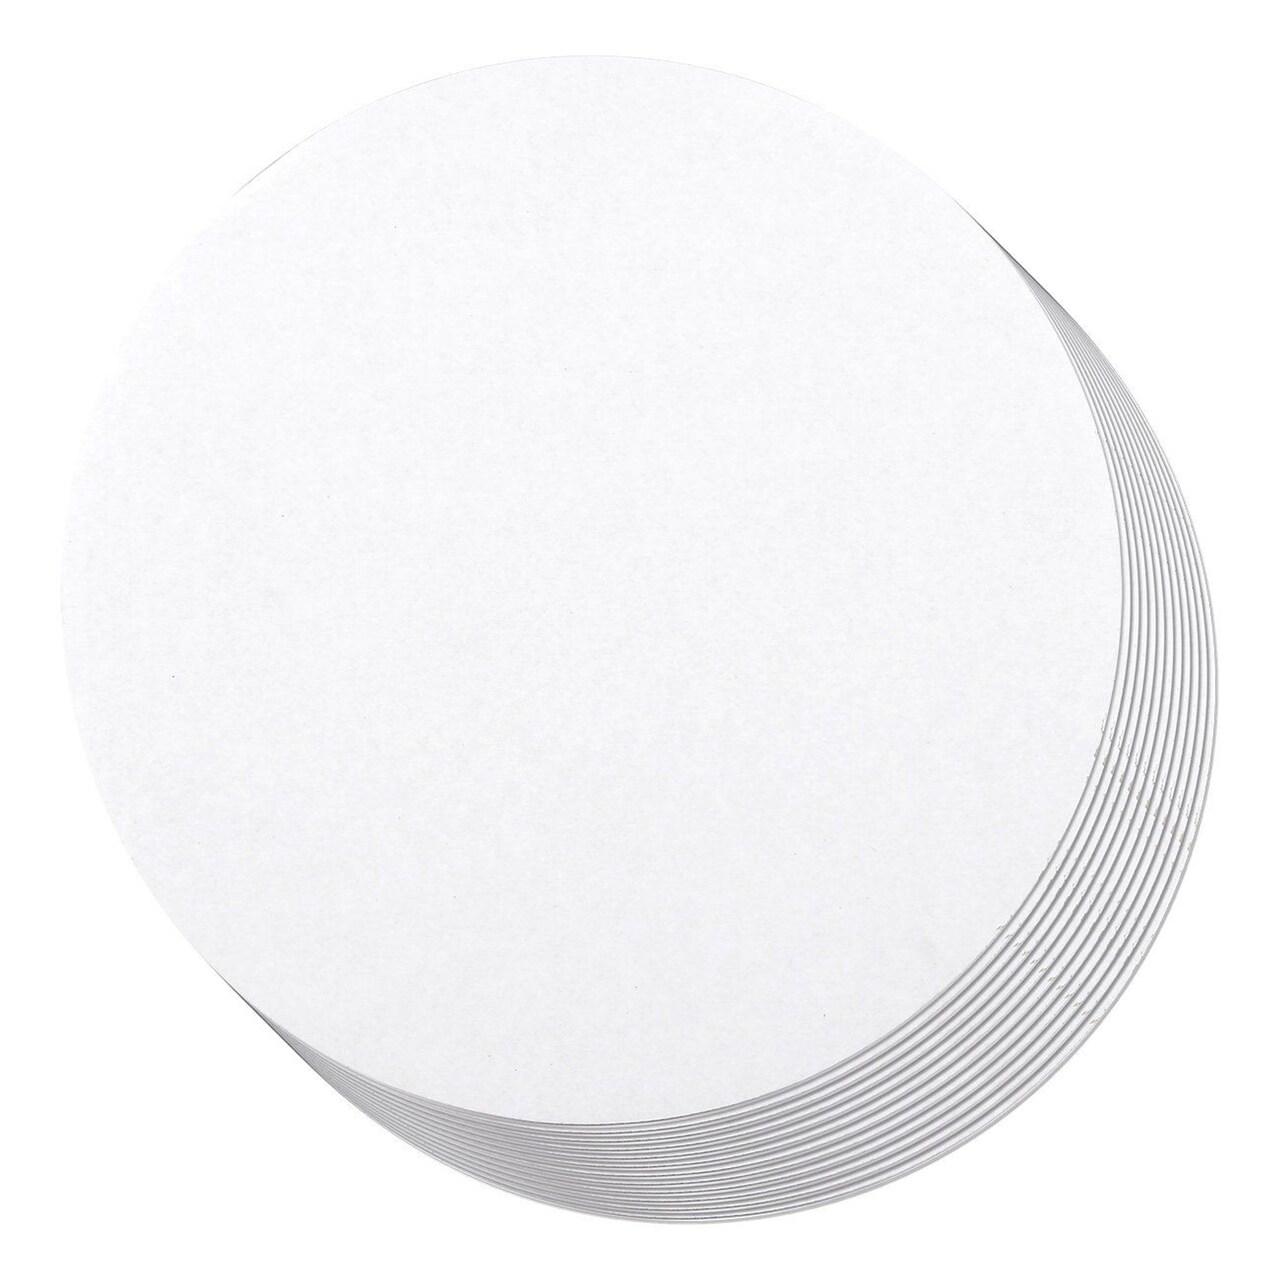 12 Pack 12 Inch Cake Boards, Round Cardboard Circles for Crafts, Baking Supplies, Desserts (White)